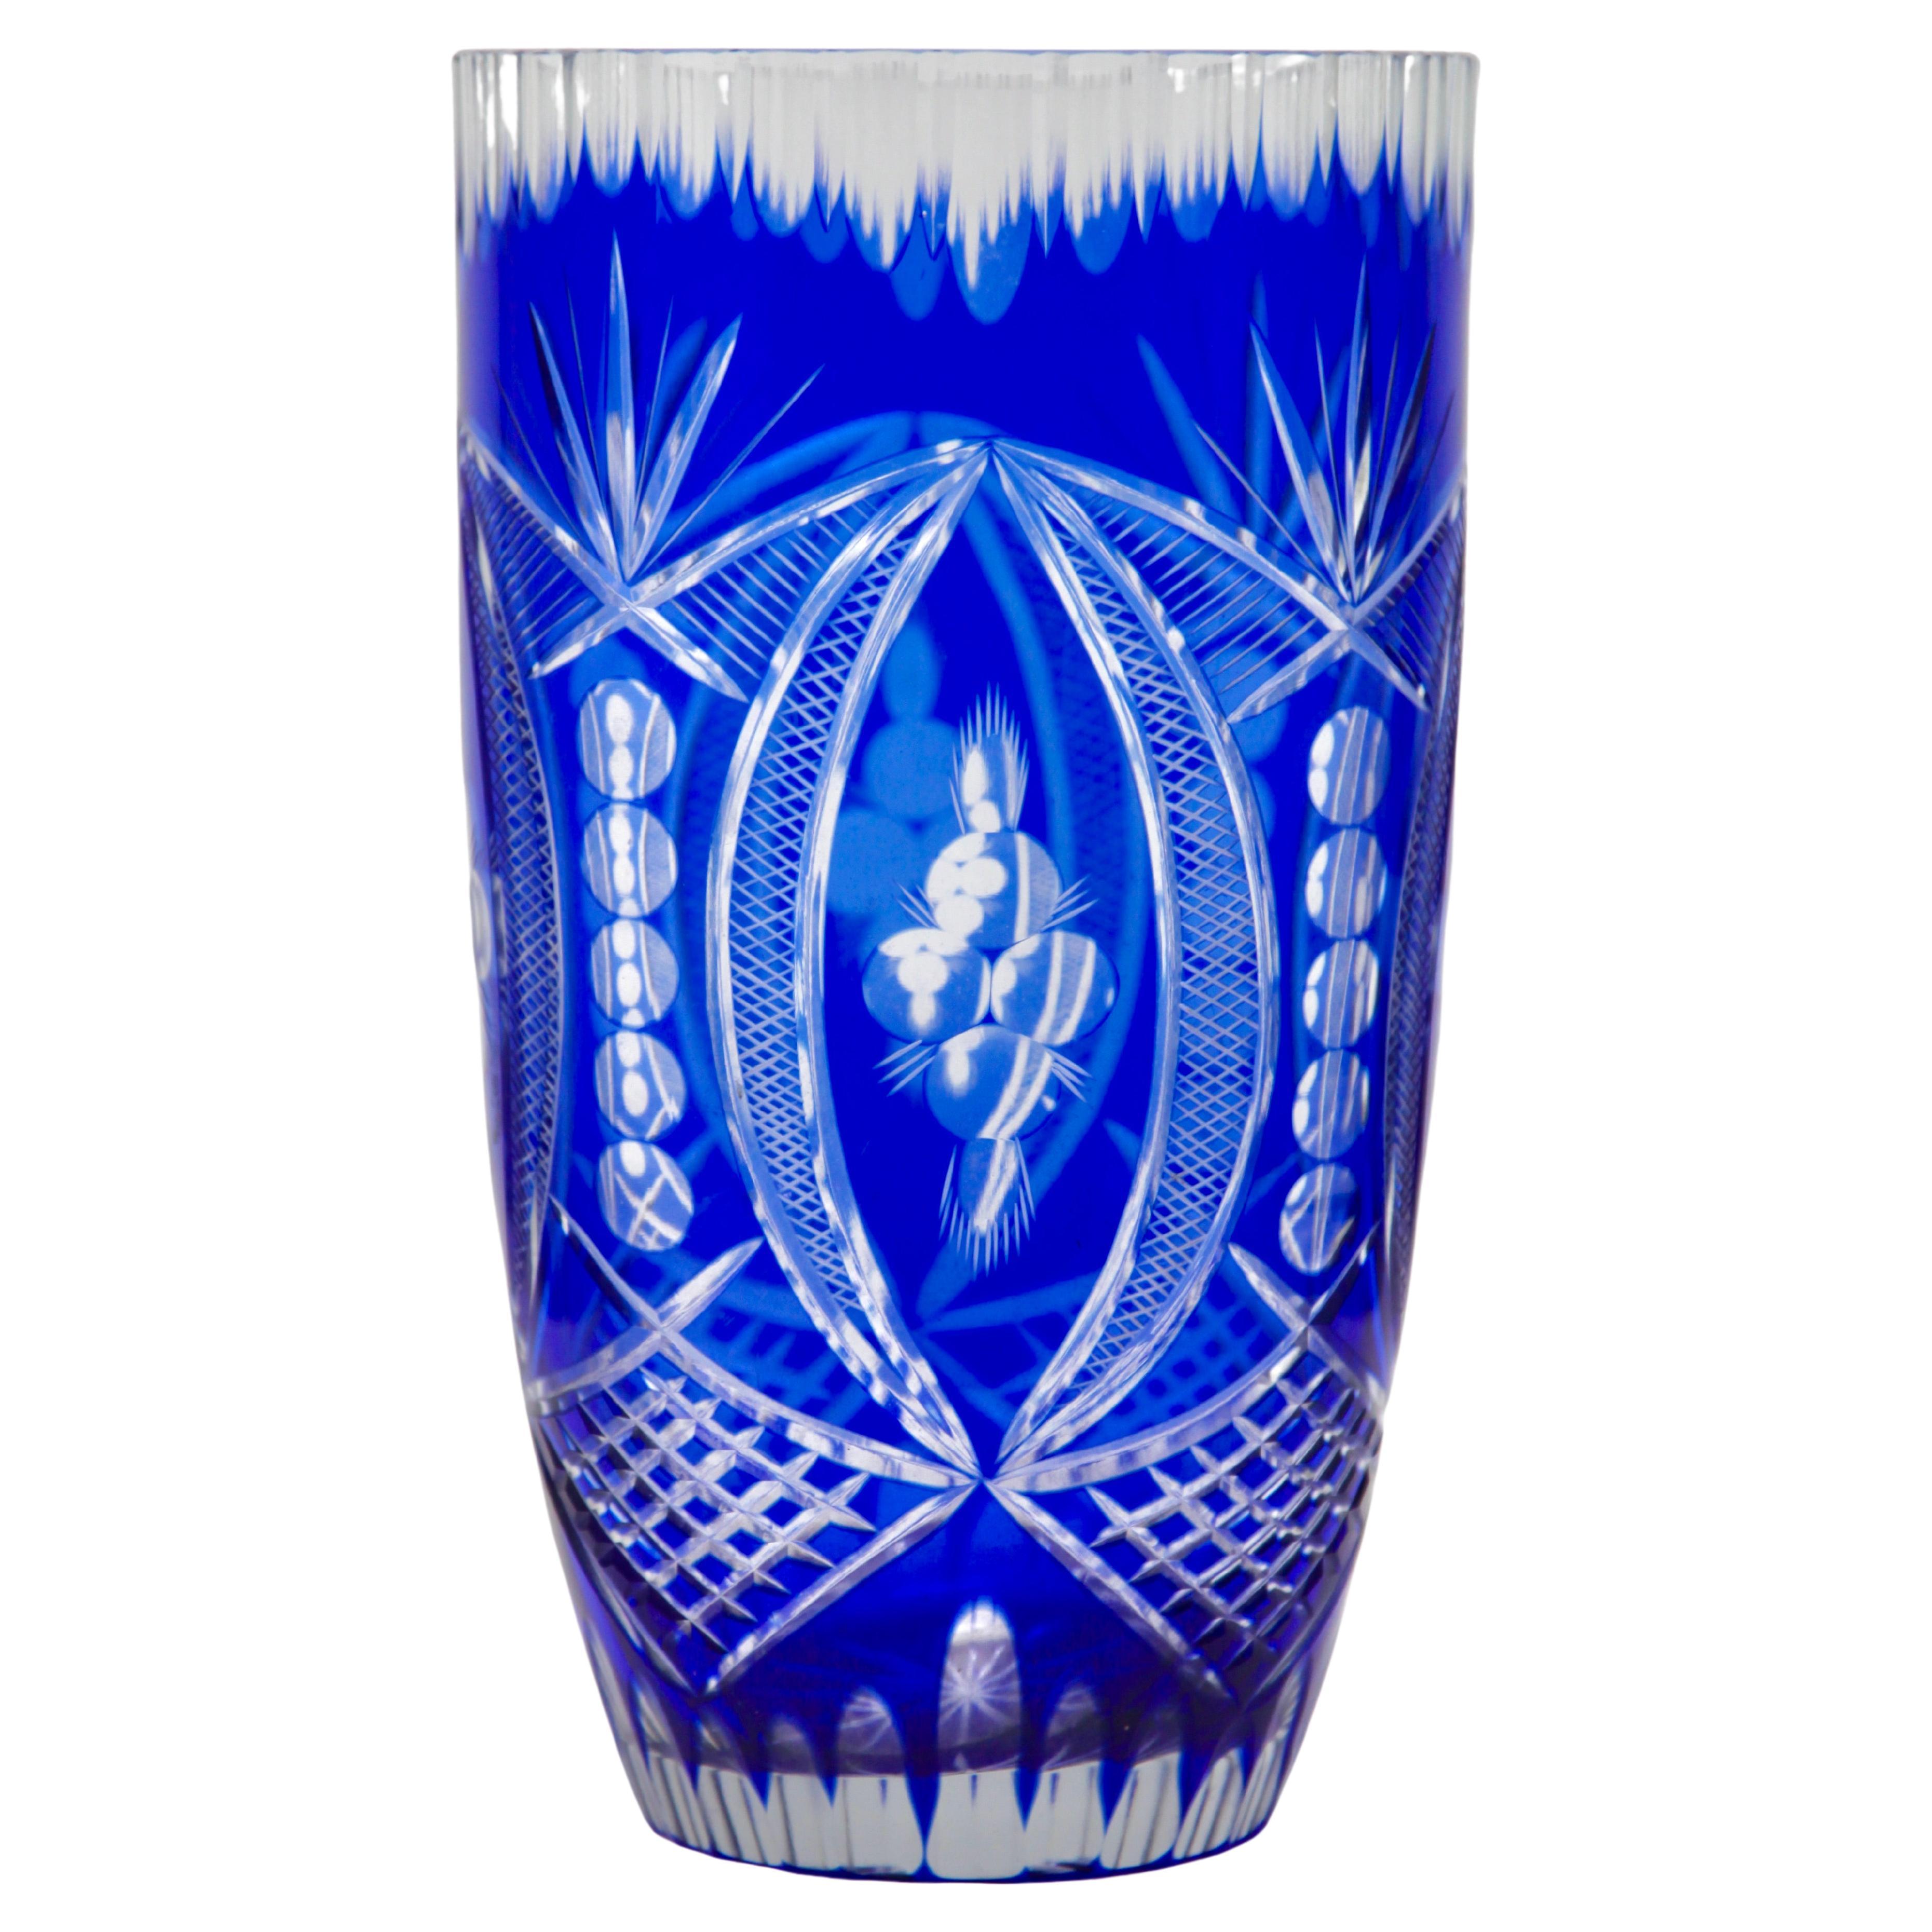 Bohemian Very Large Cobalt Overlay Cut-Crystal Vase, Mid 20th Century For Sale